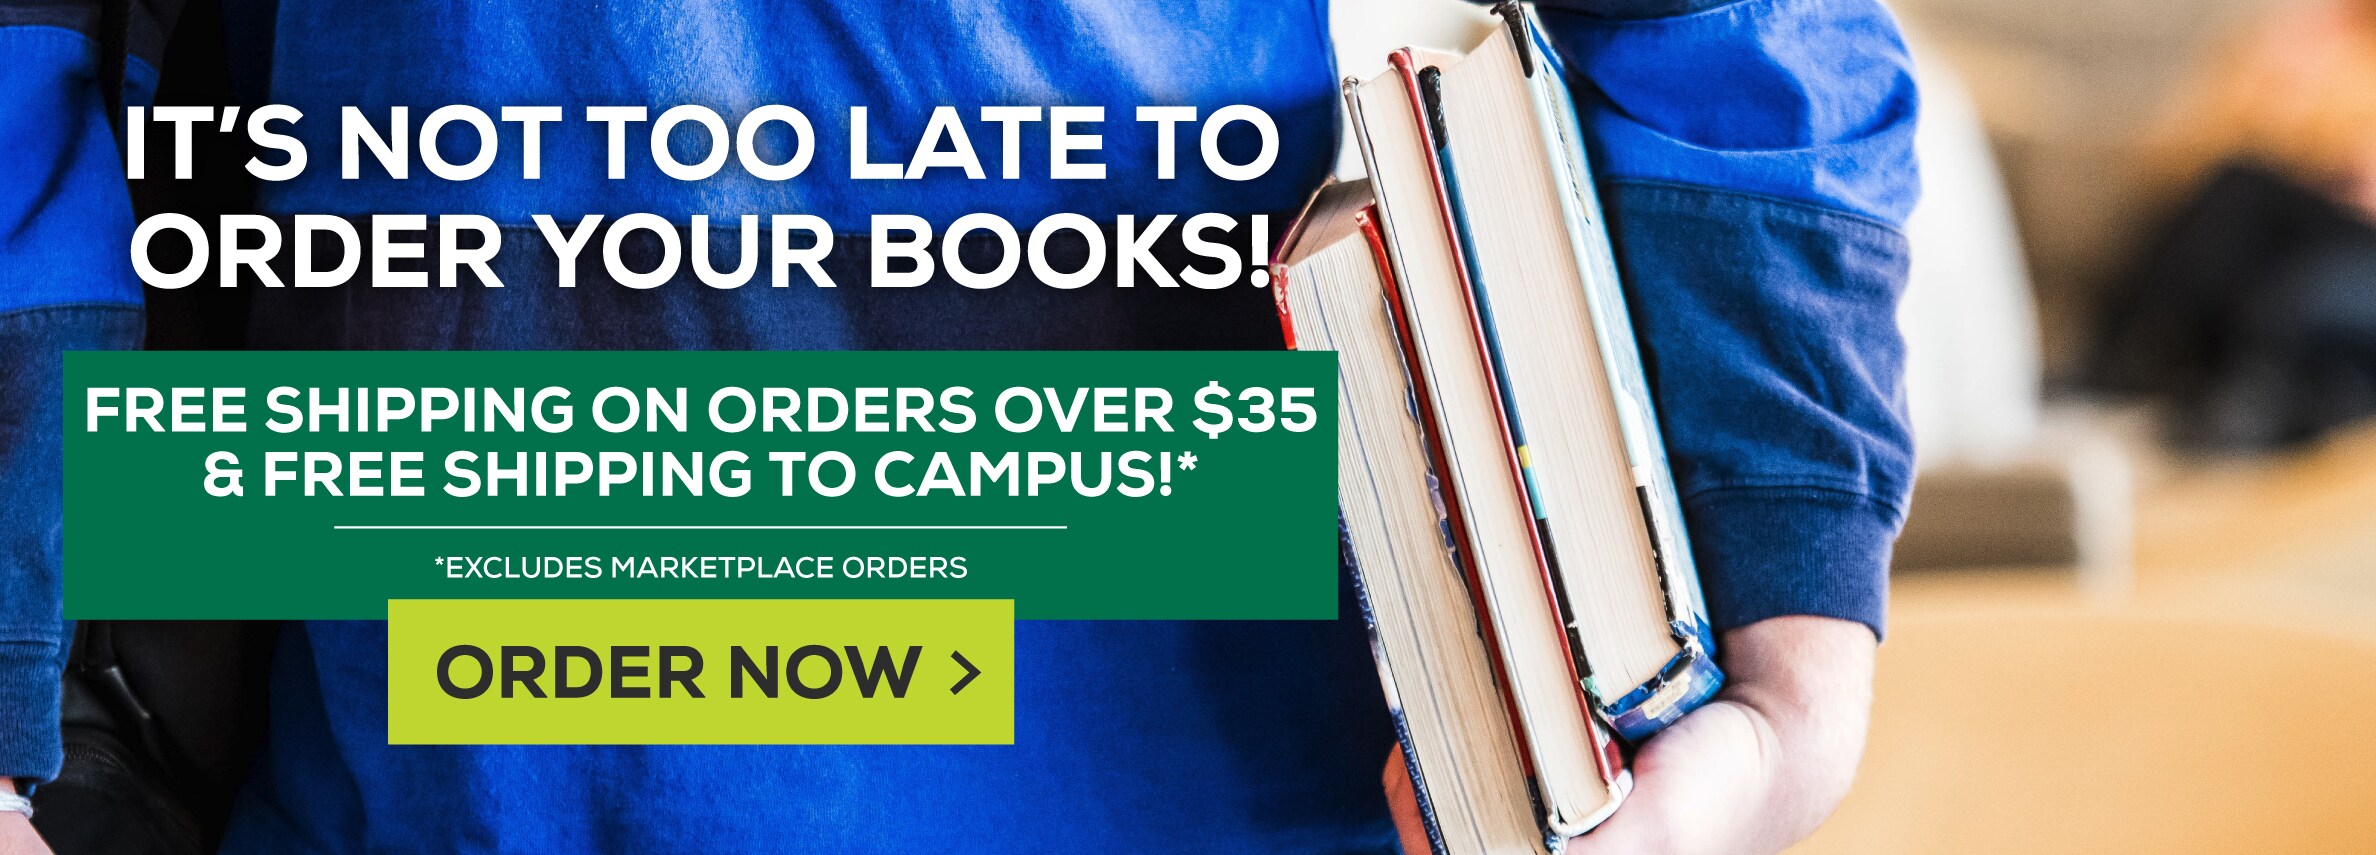 It's not too late to order your books! Free shipping on all orders over $35 and free shipping to campus!* *Excludes marketplace purchases. Order Now.